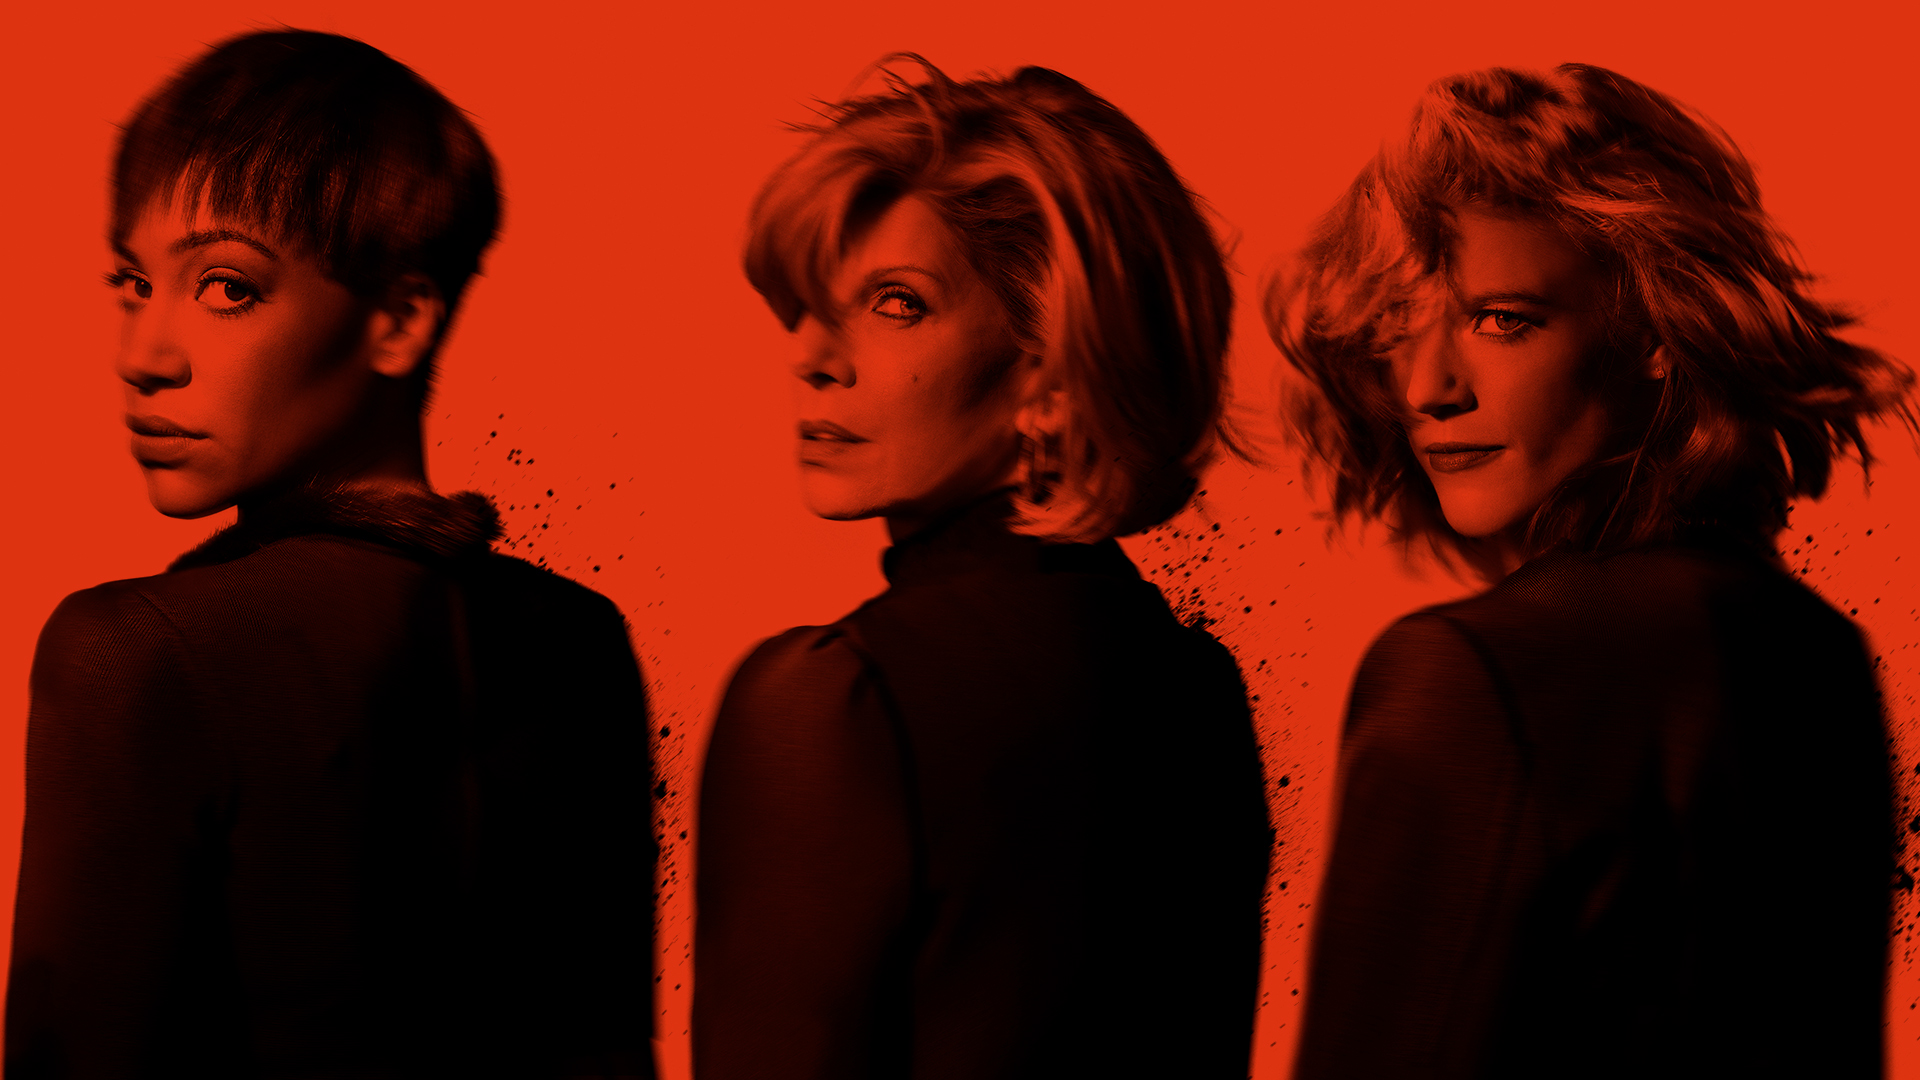 The Good Fight Wallpapers